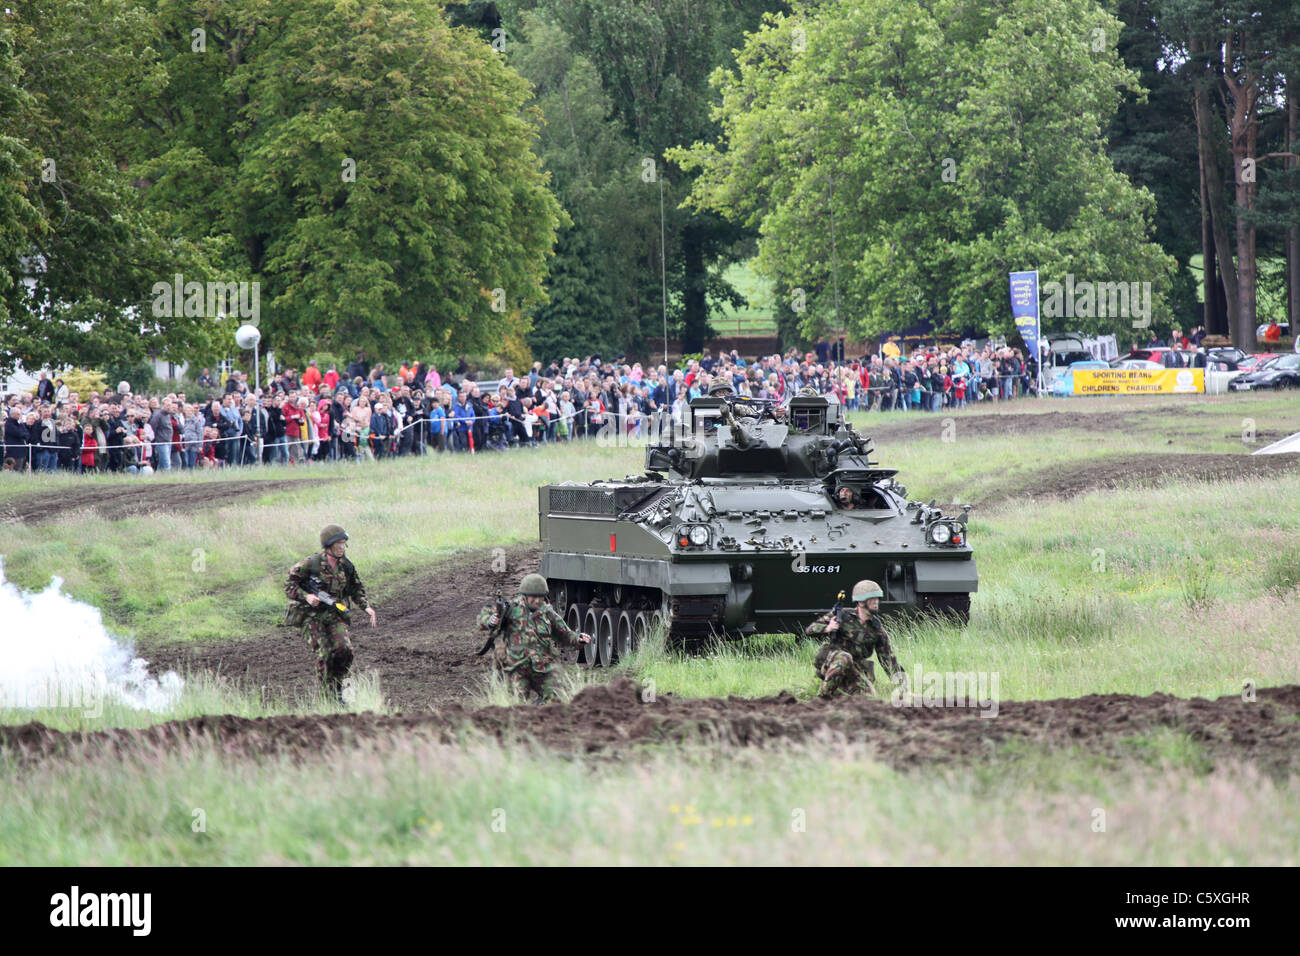 Cholmondeley Castle Pageant of Power. A Warrior Infantry Fighting Vehicle during a military assault demonstration. Stock Photo